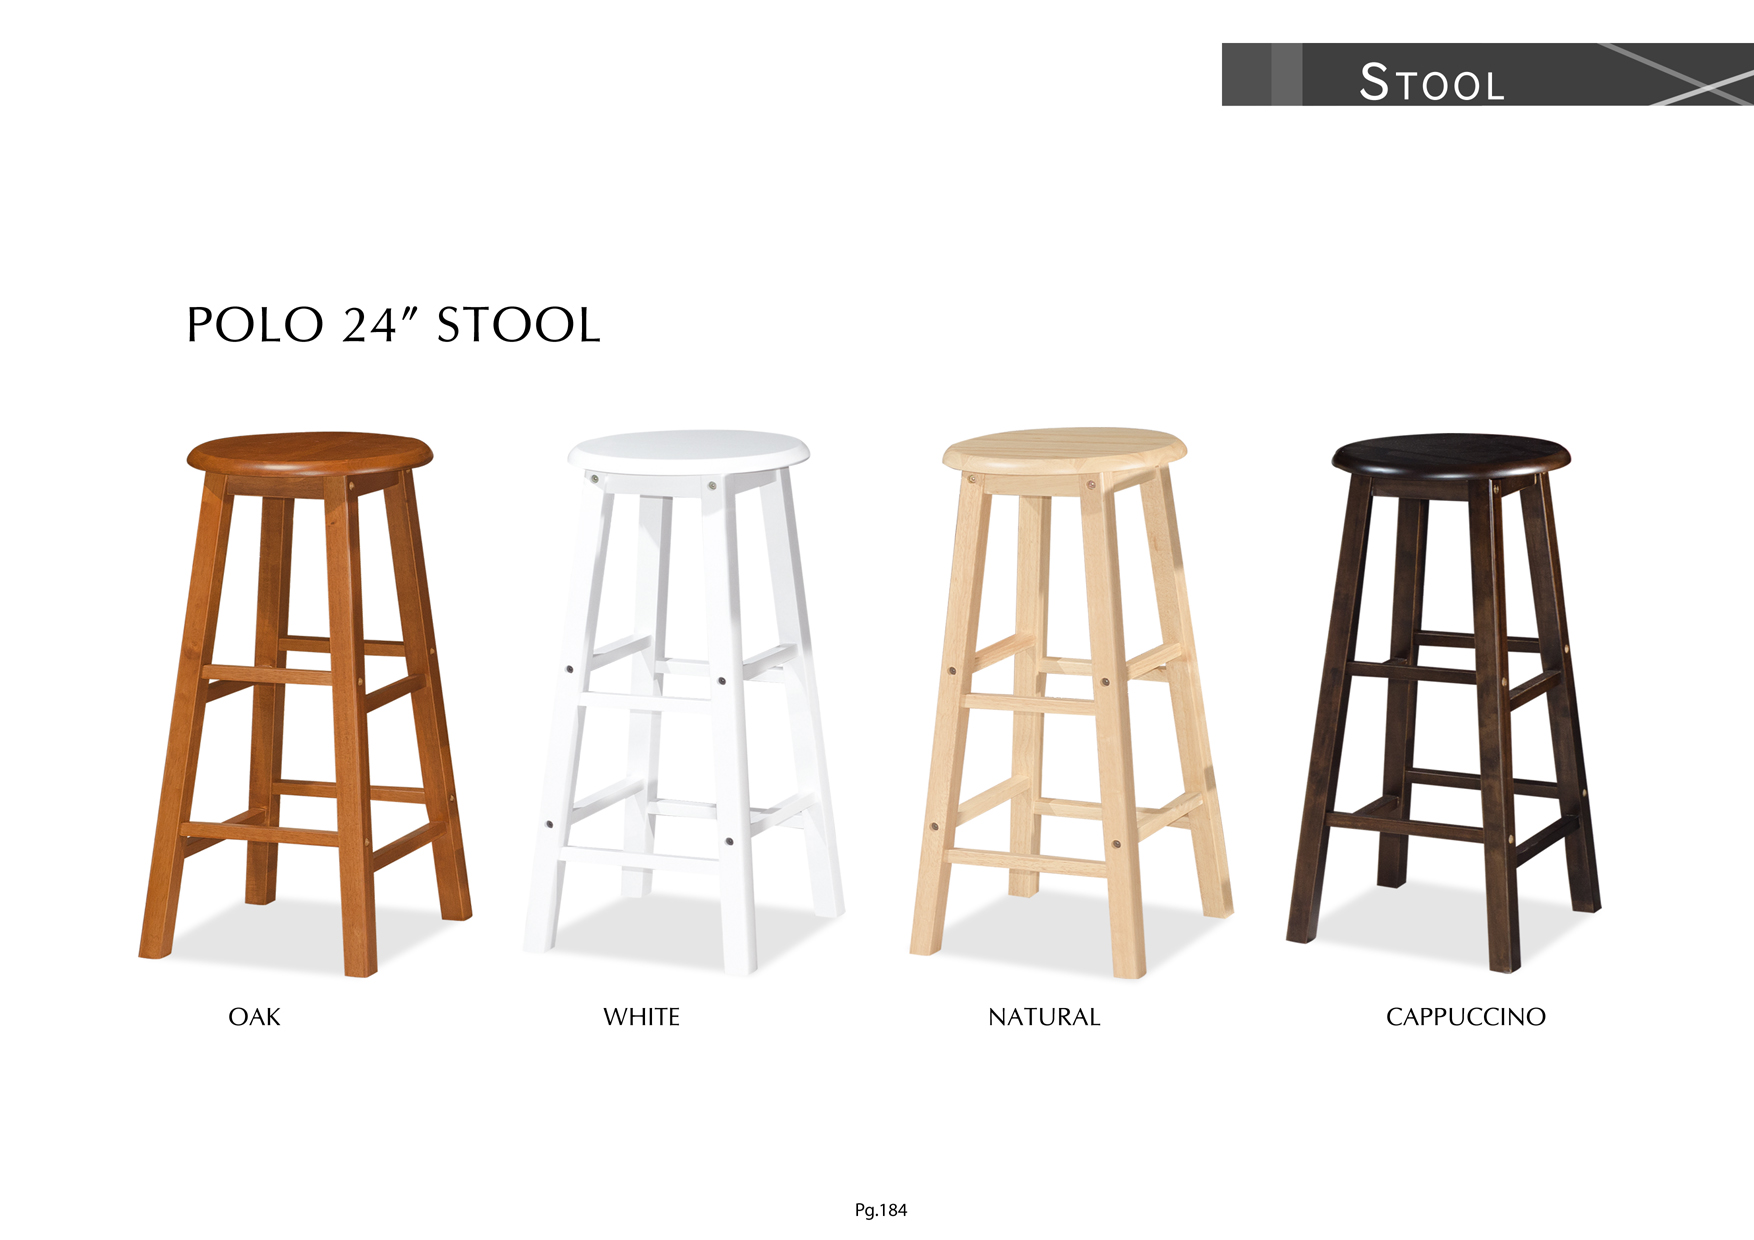 Product: PG184. POLO 24 STOOL